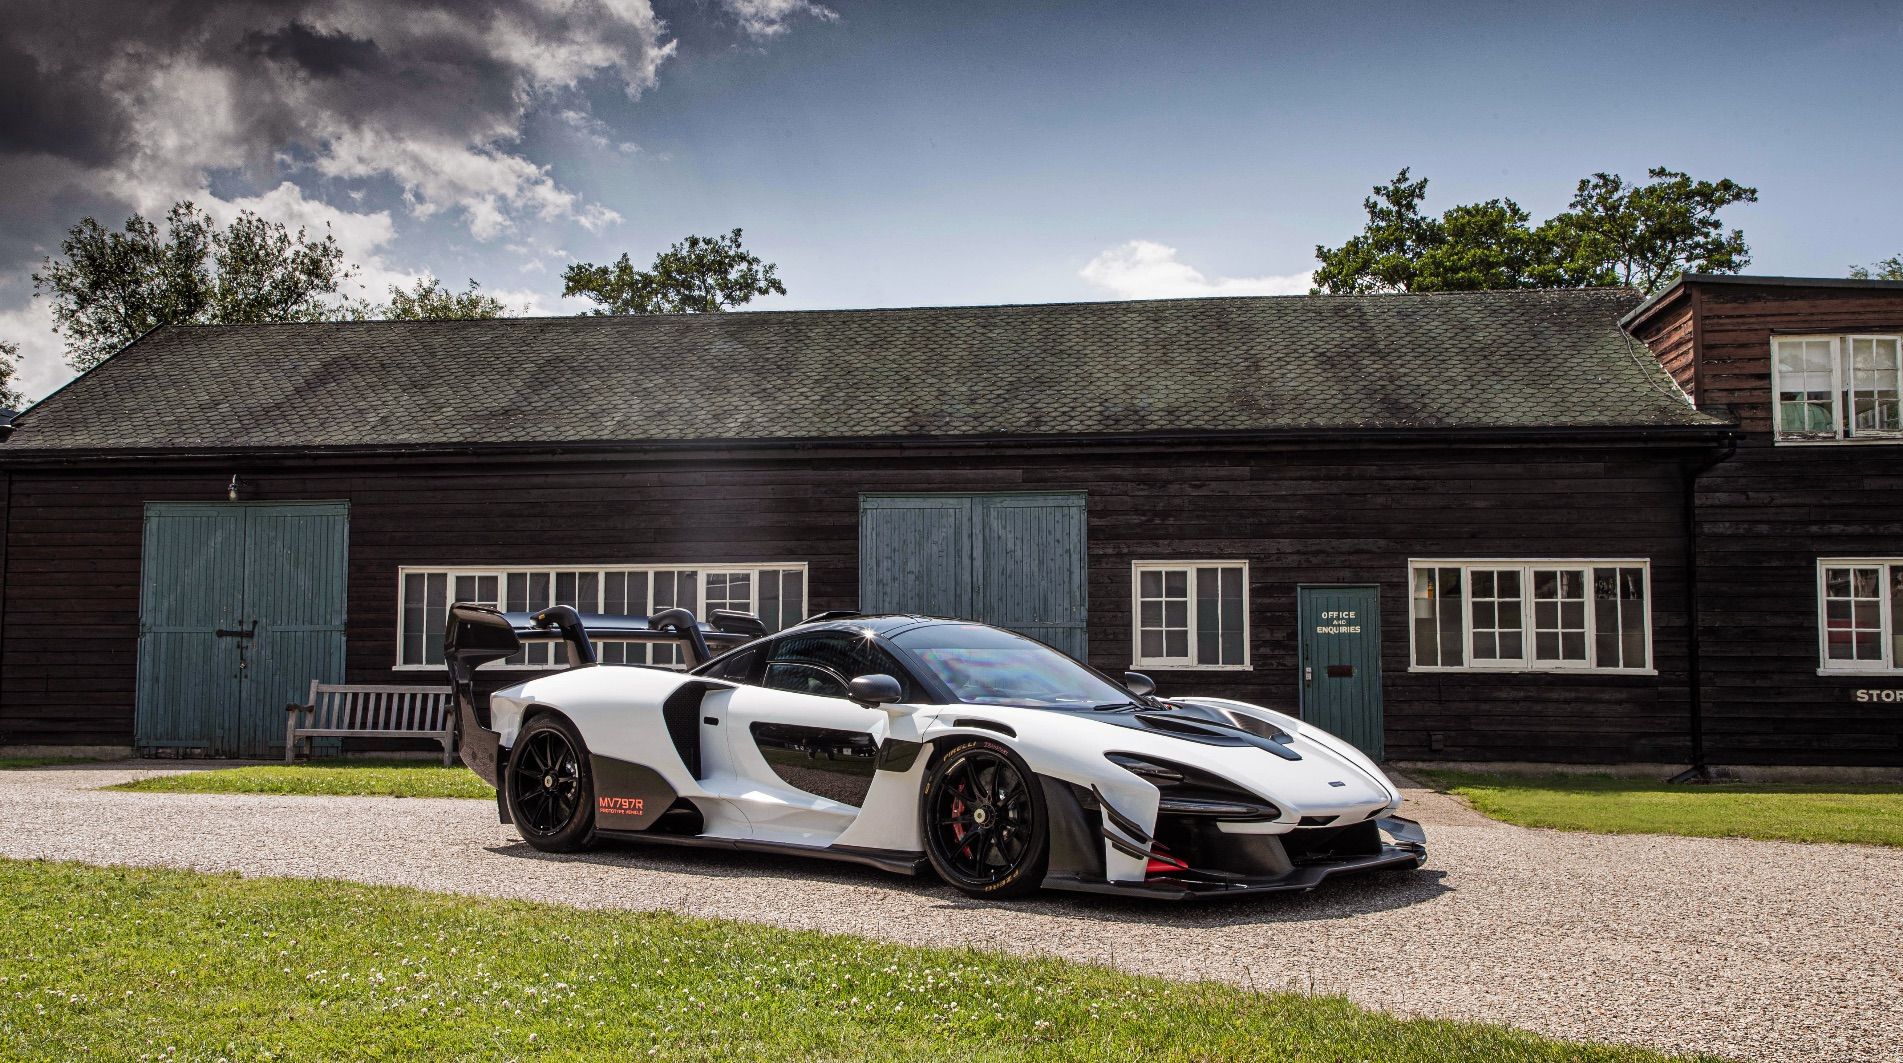 White Prototype McLaren Senna GTR parked outside a Brown shed with green doors